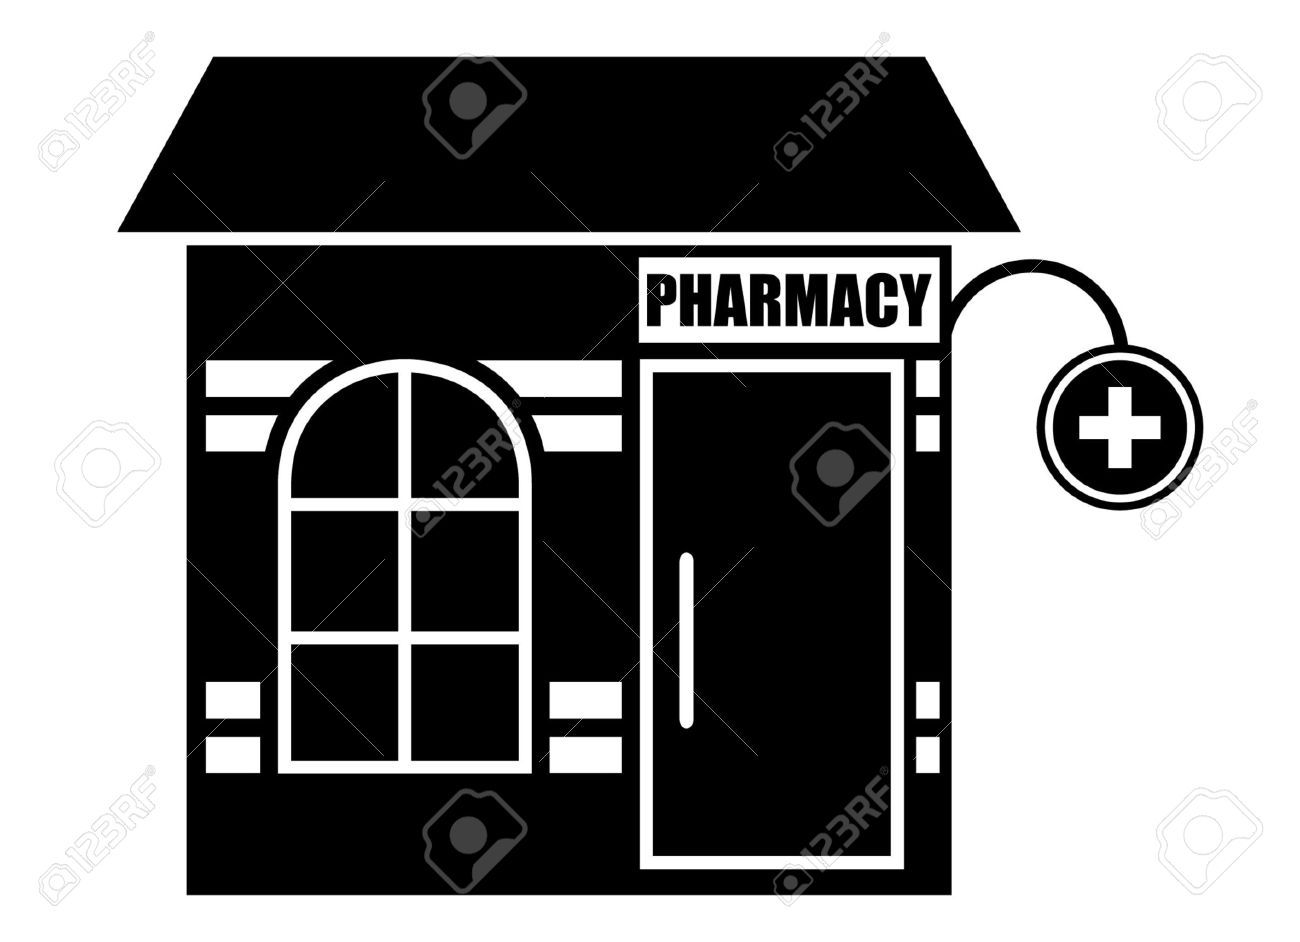 pharmacy clipart black and white